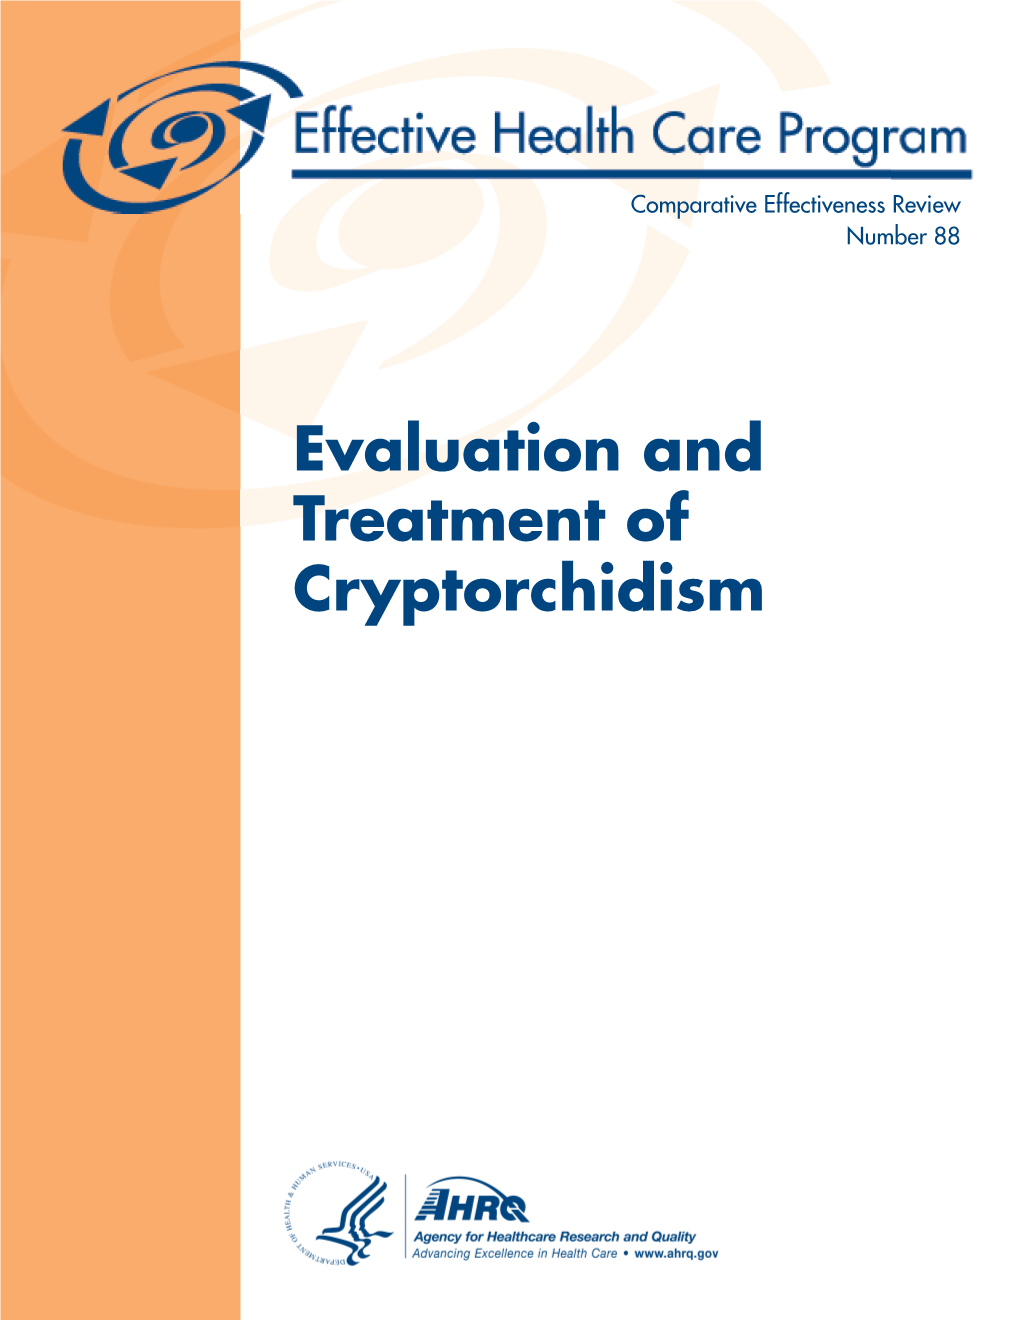 CER 88: Evaluation and Treatment of Cryptorchidism